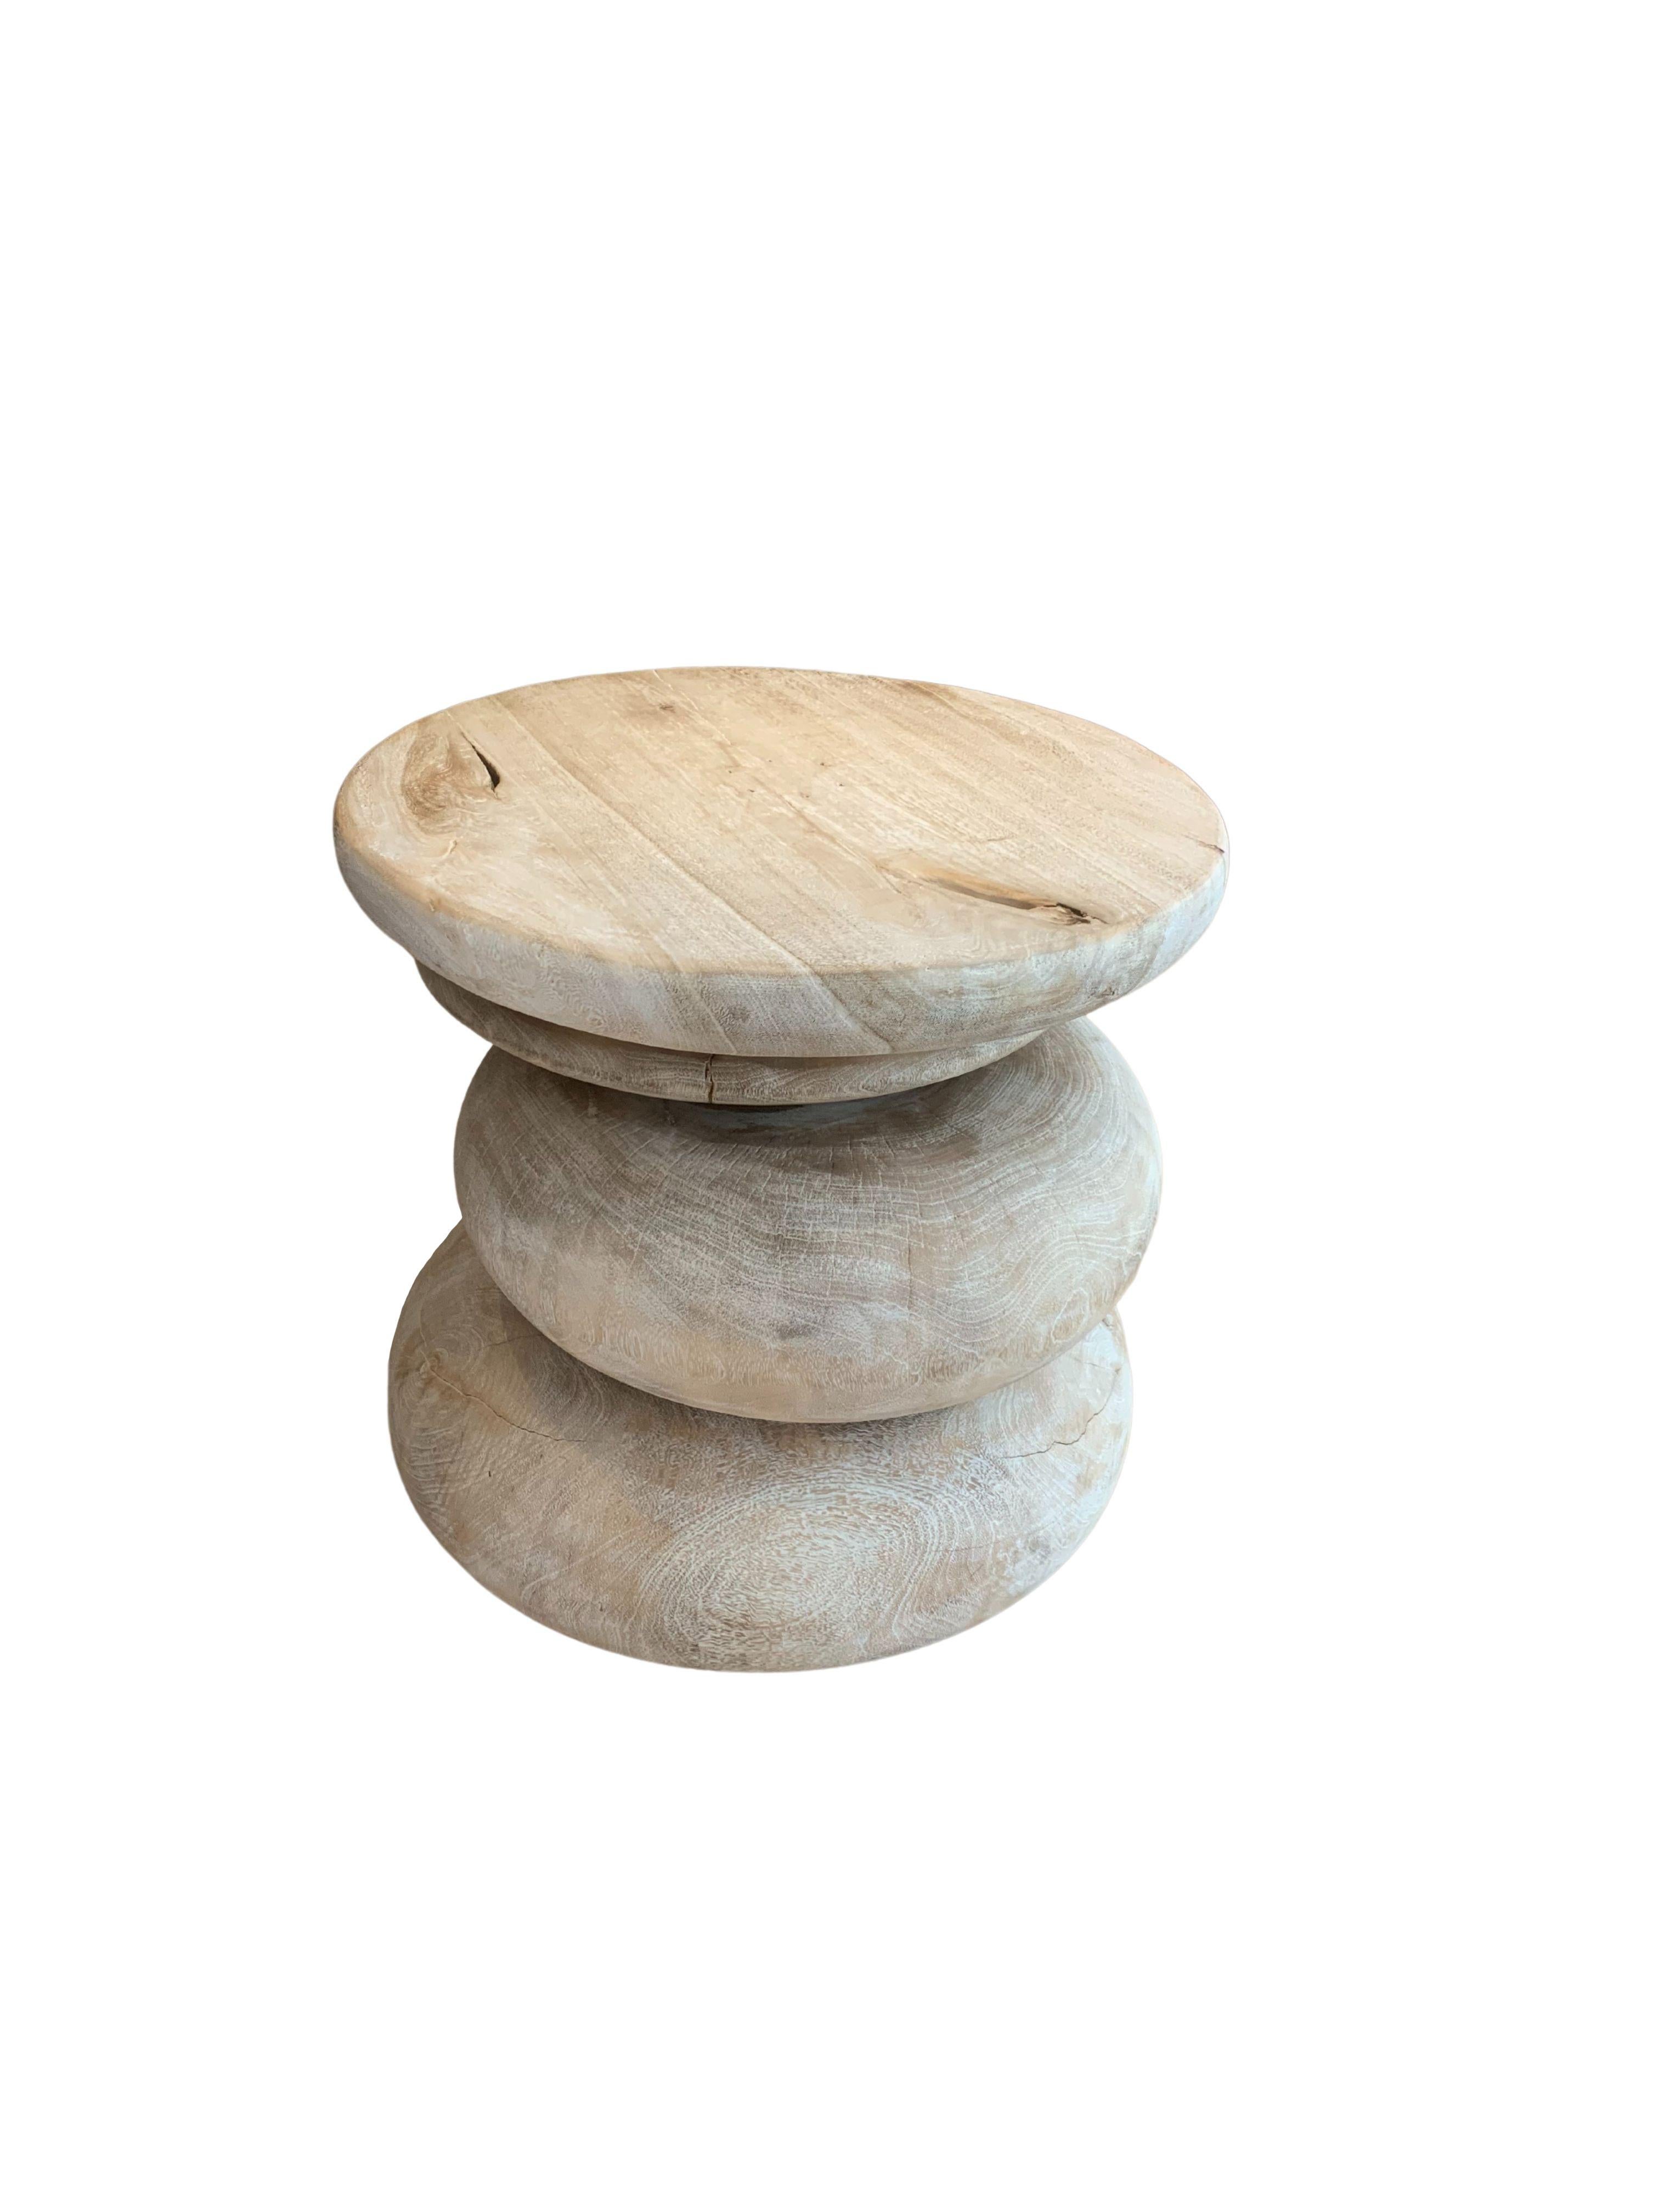 A wonderfully sculptural side table resembling a pile a river stones in a washed out finish. Its neutral pigment and subtle wood texture makes it perfect for any space. A uniquely sculptural and versatile piece certain to invoke conversation. This